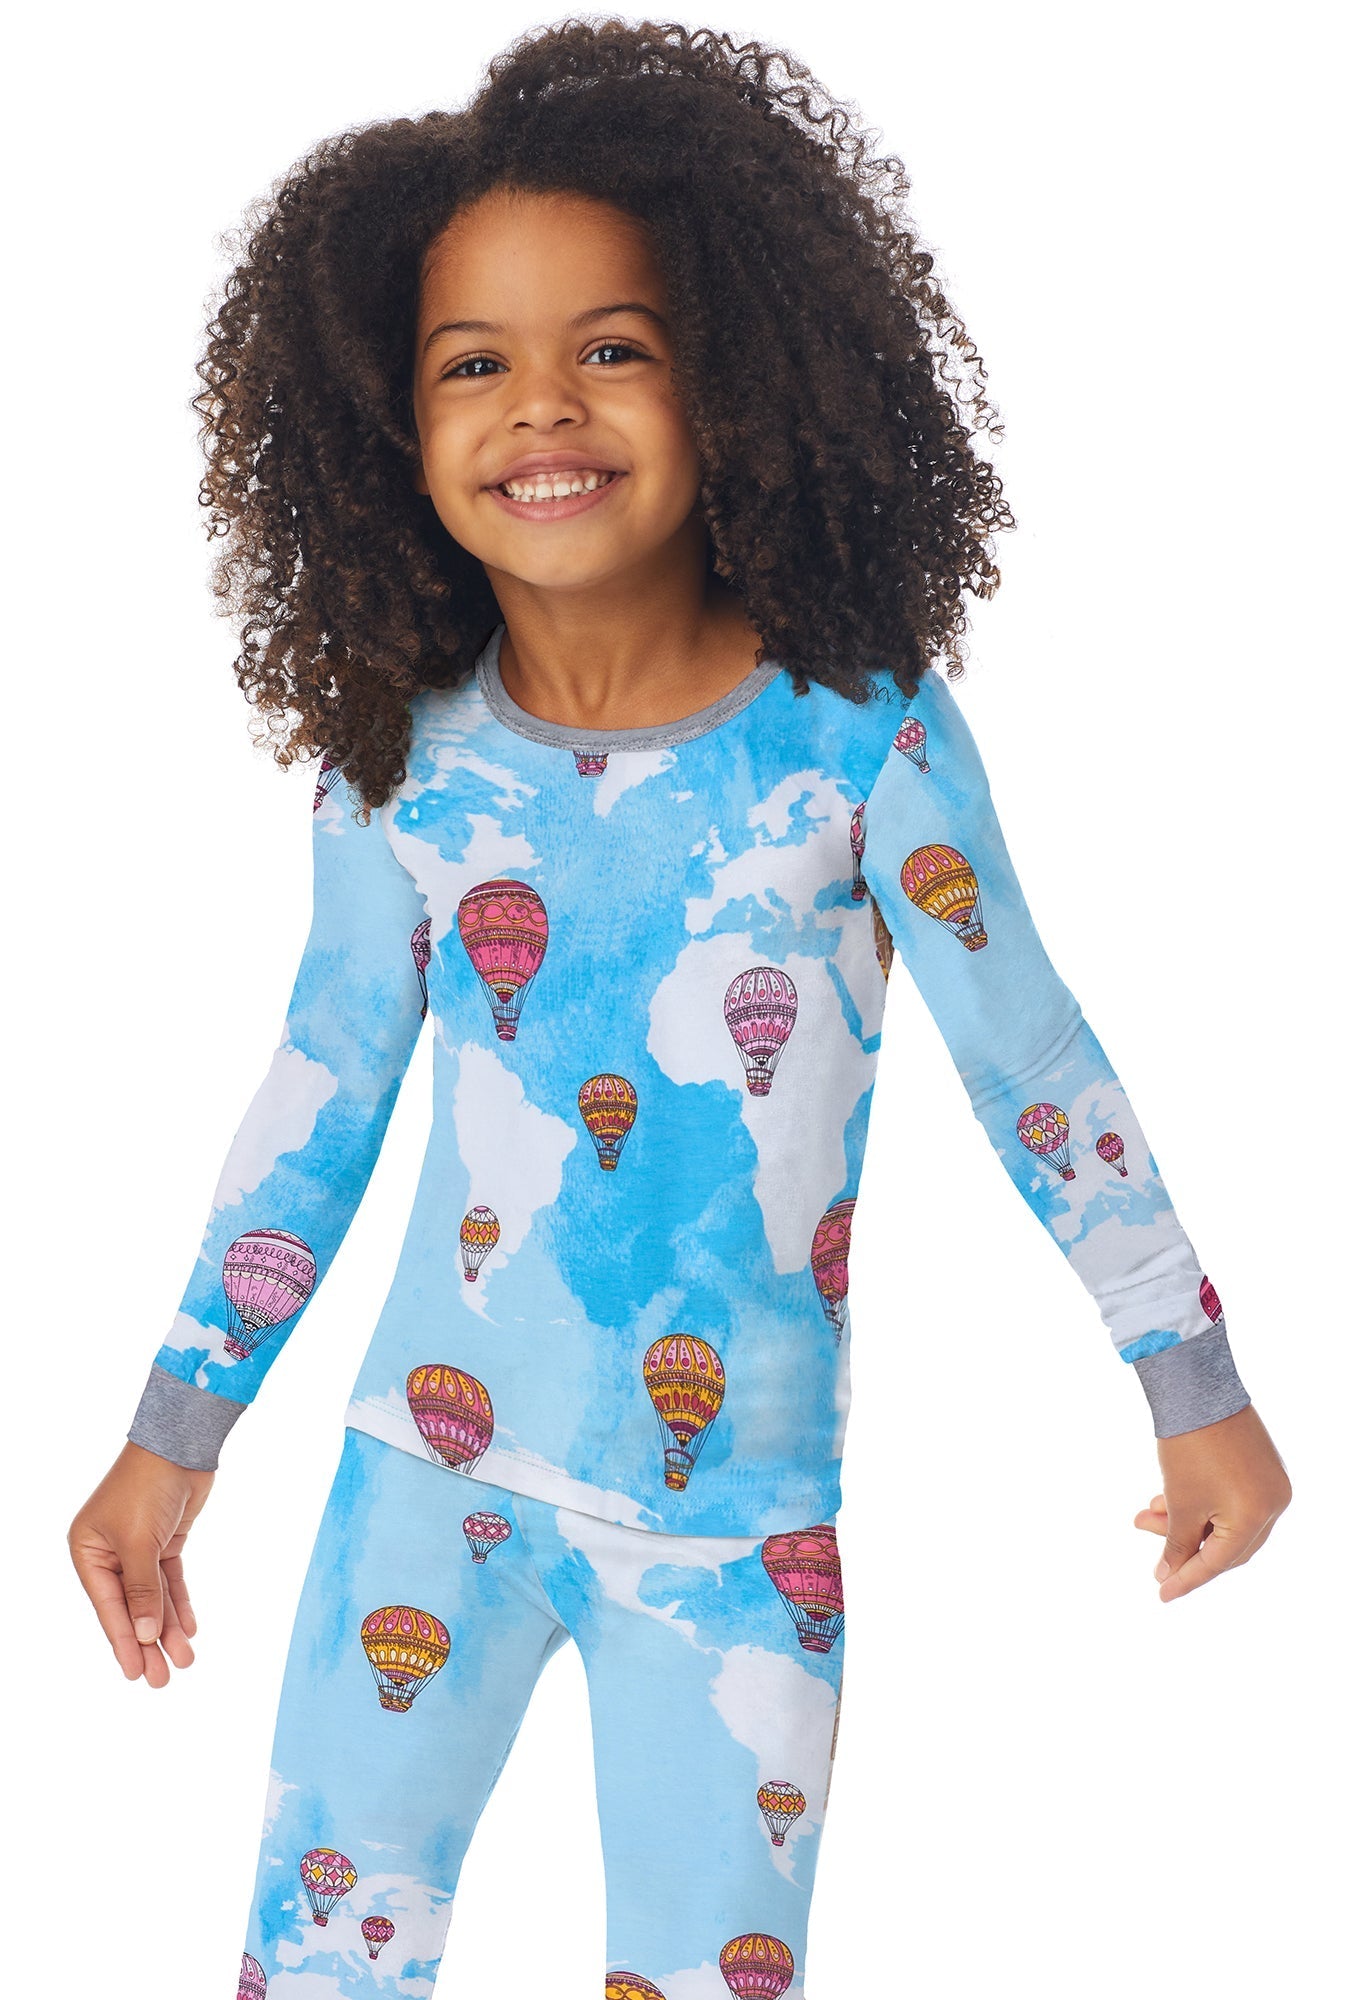 A kid wearing a long sleeve pj set with parachute in the sky pattern.